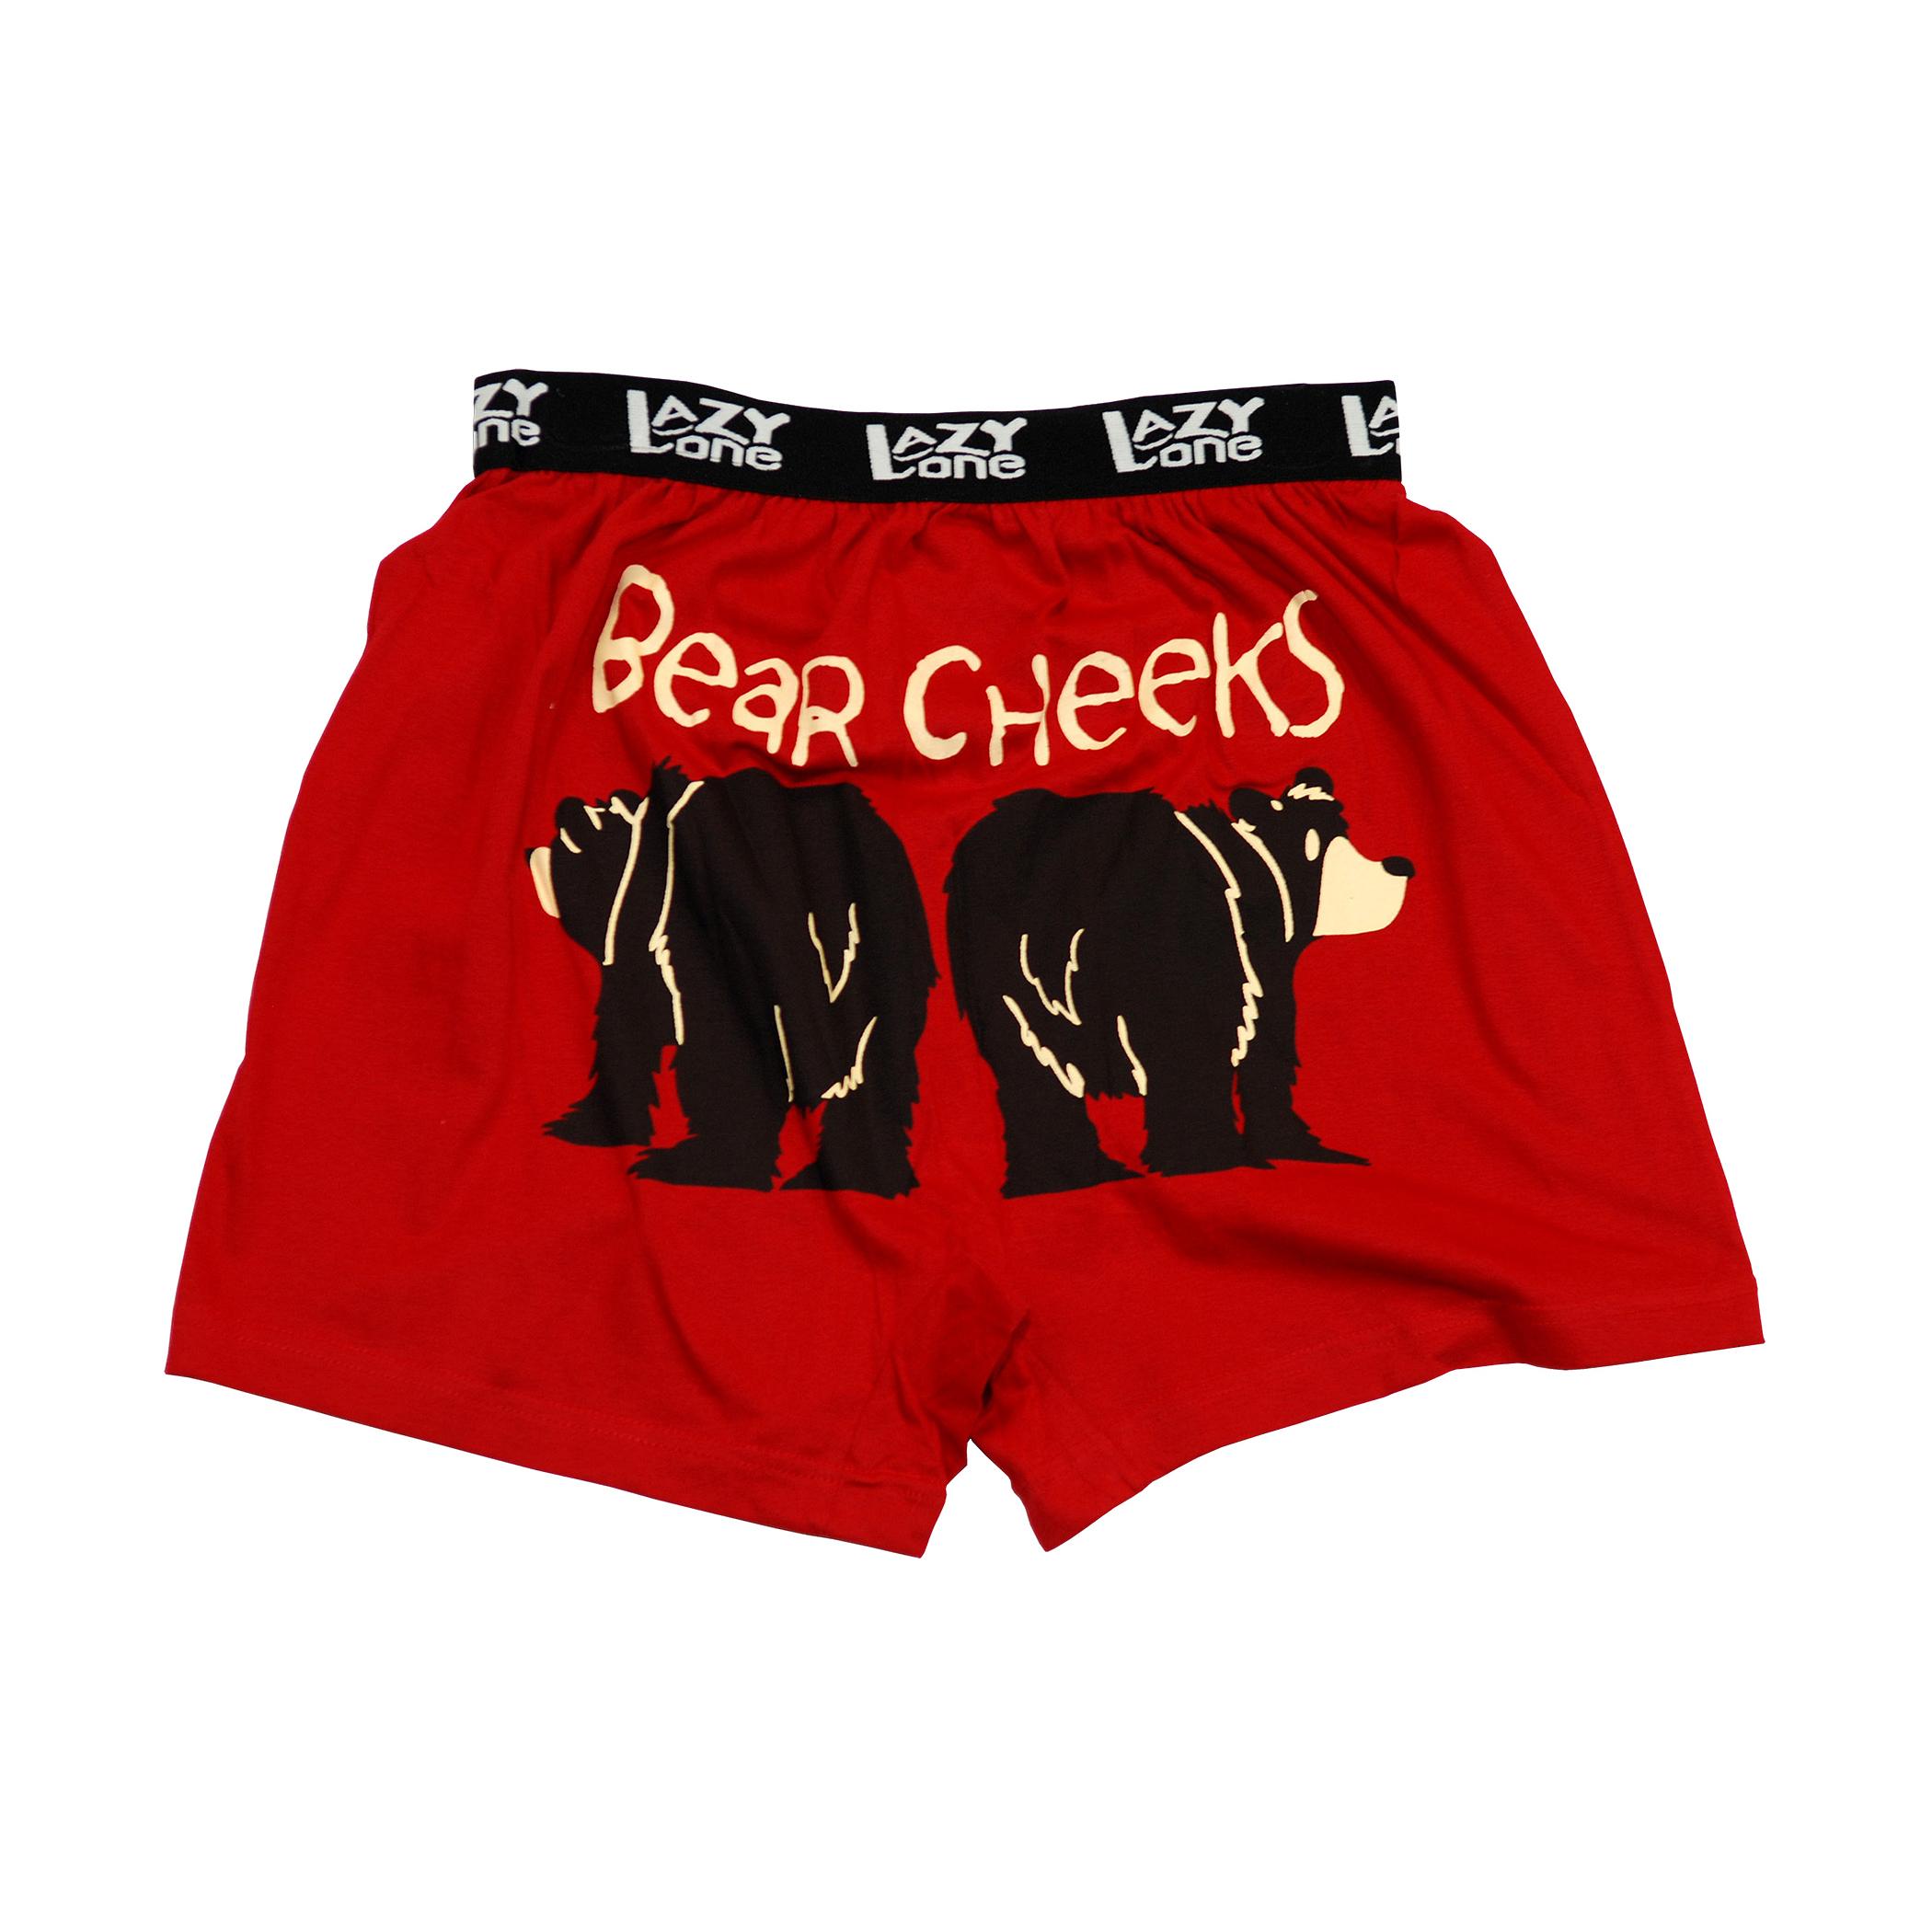 LazyOne Funny Animal Boxers, Model Name, Humorous Underwear, Gag Gifts for  Men, Large